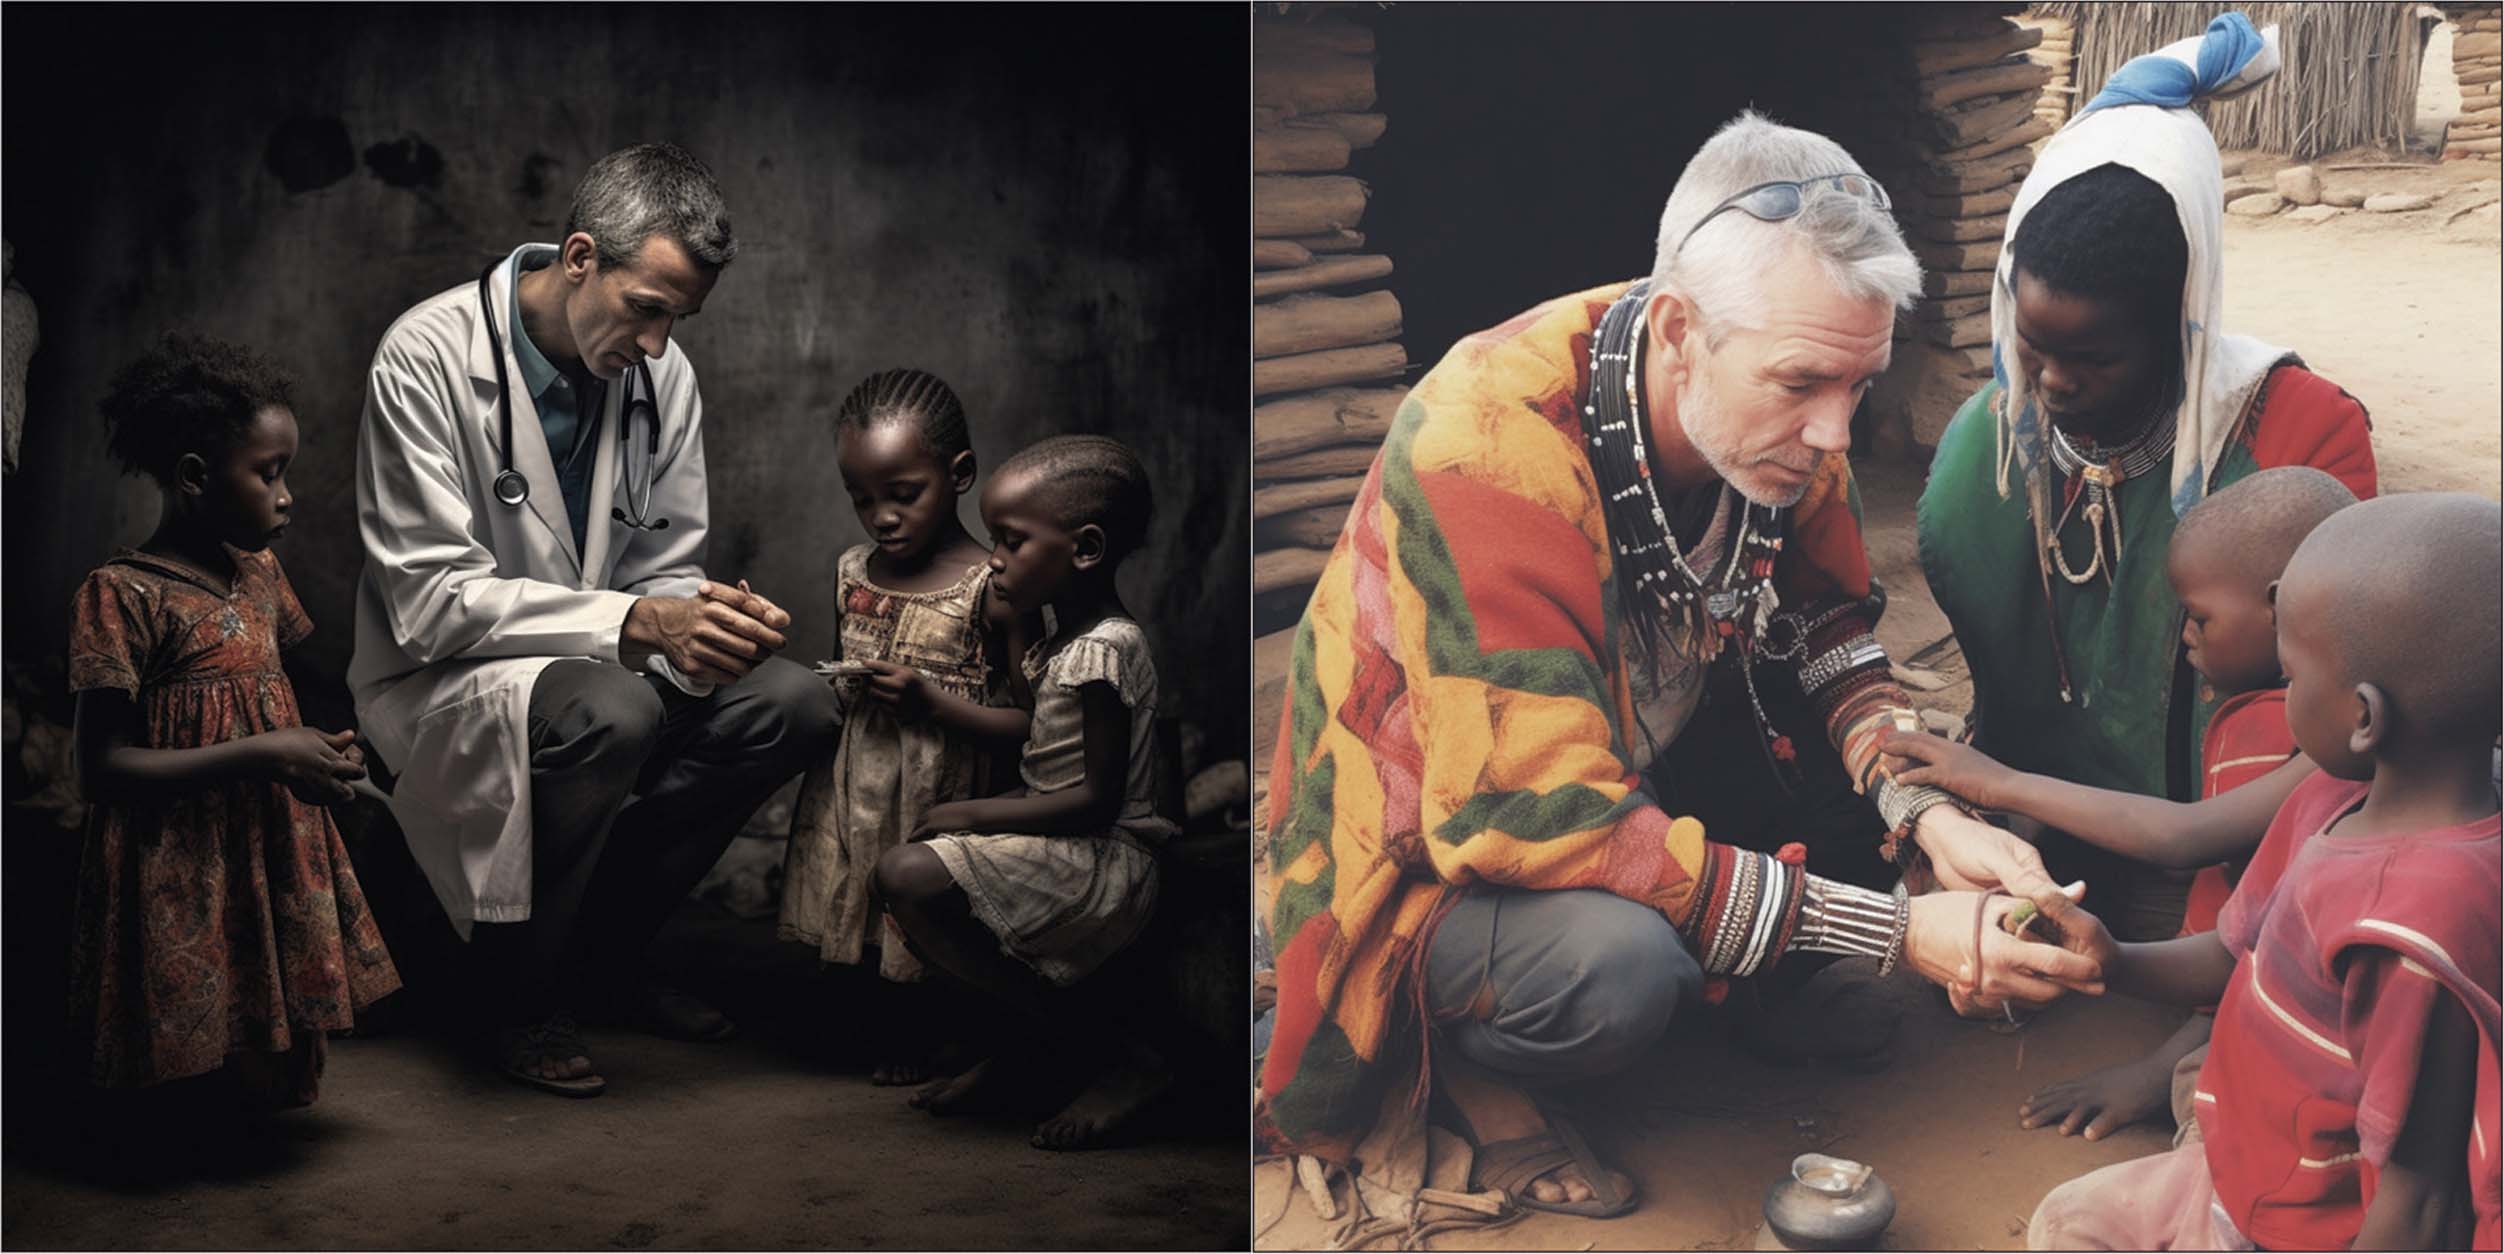 Two pictures generated by biased AIs. The prompt asked for “black African doctor helping poor and sick white children” but the images show white doctors helping black children.